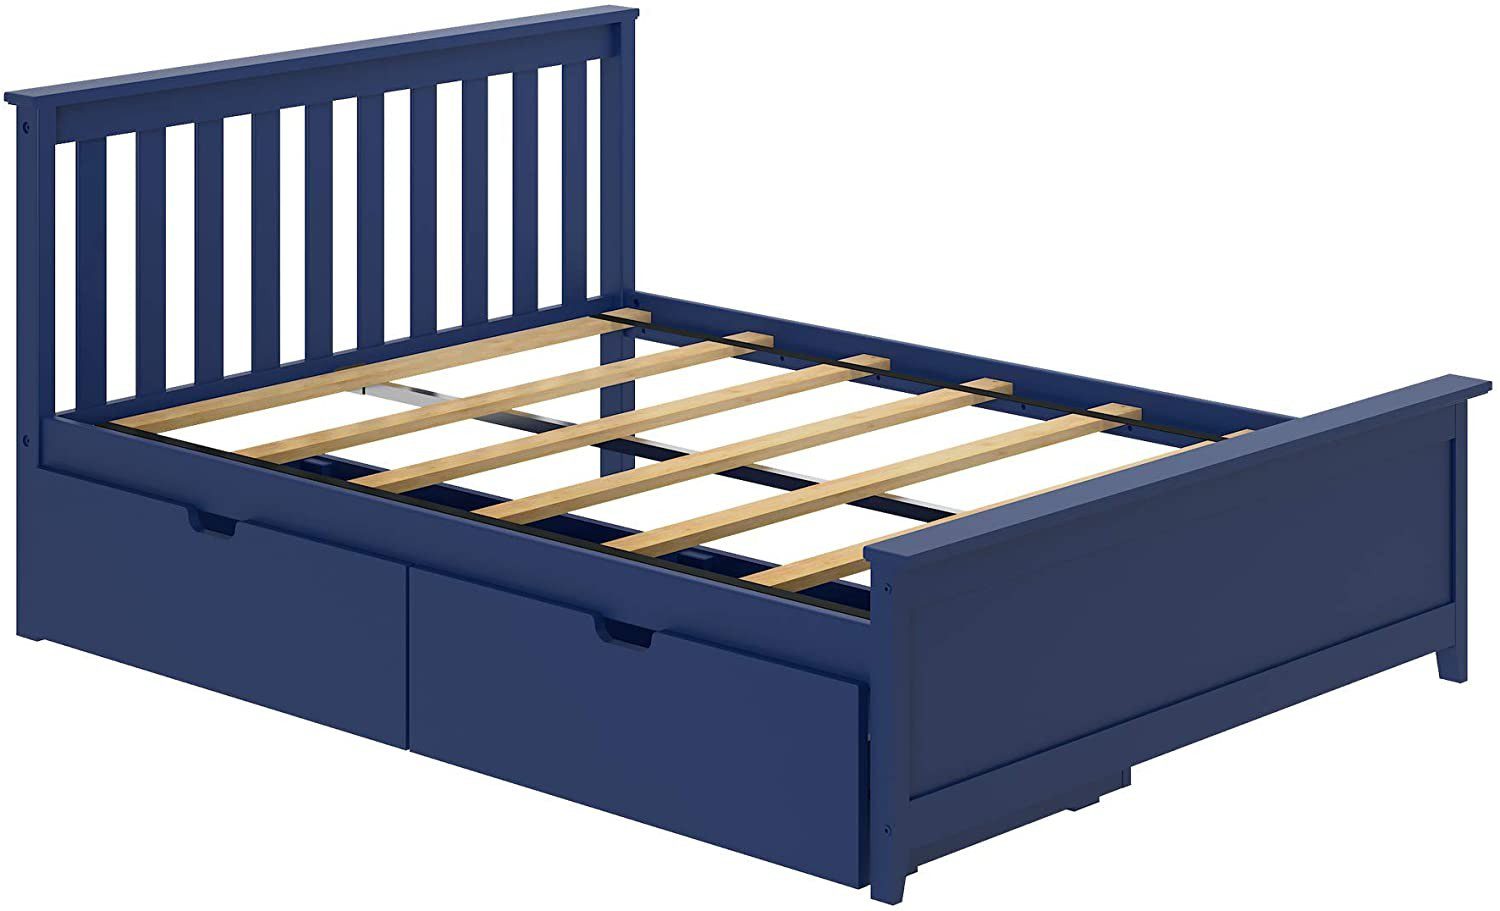 SOLID WOOD FULL SIZE PLATFORM BED IN BLUE FINISH WITH STORAGE